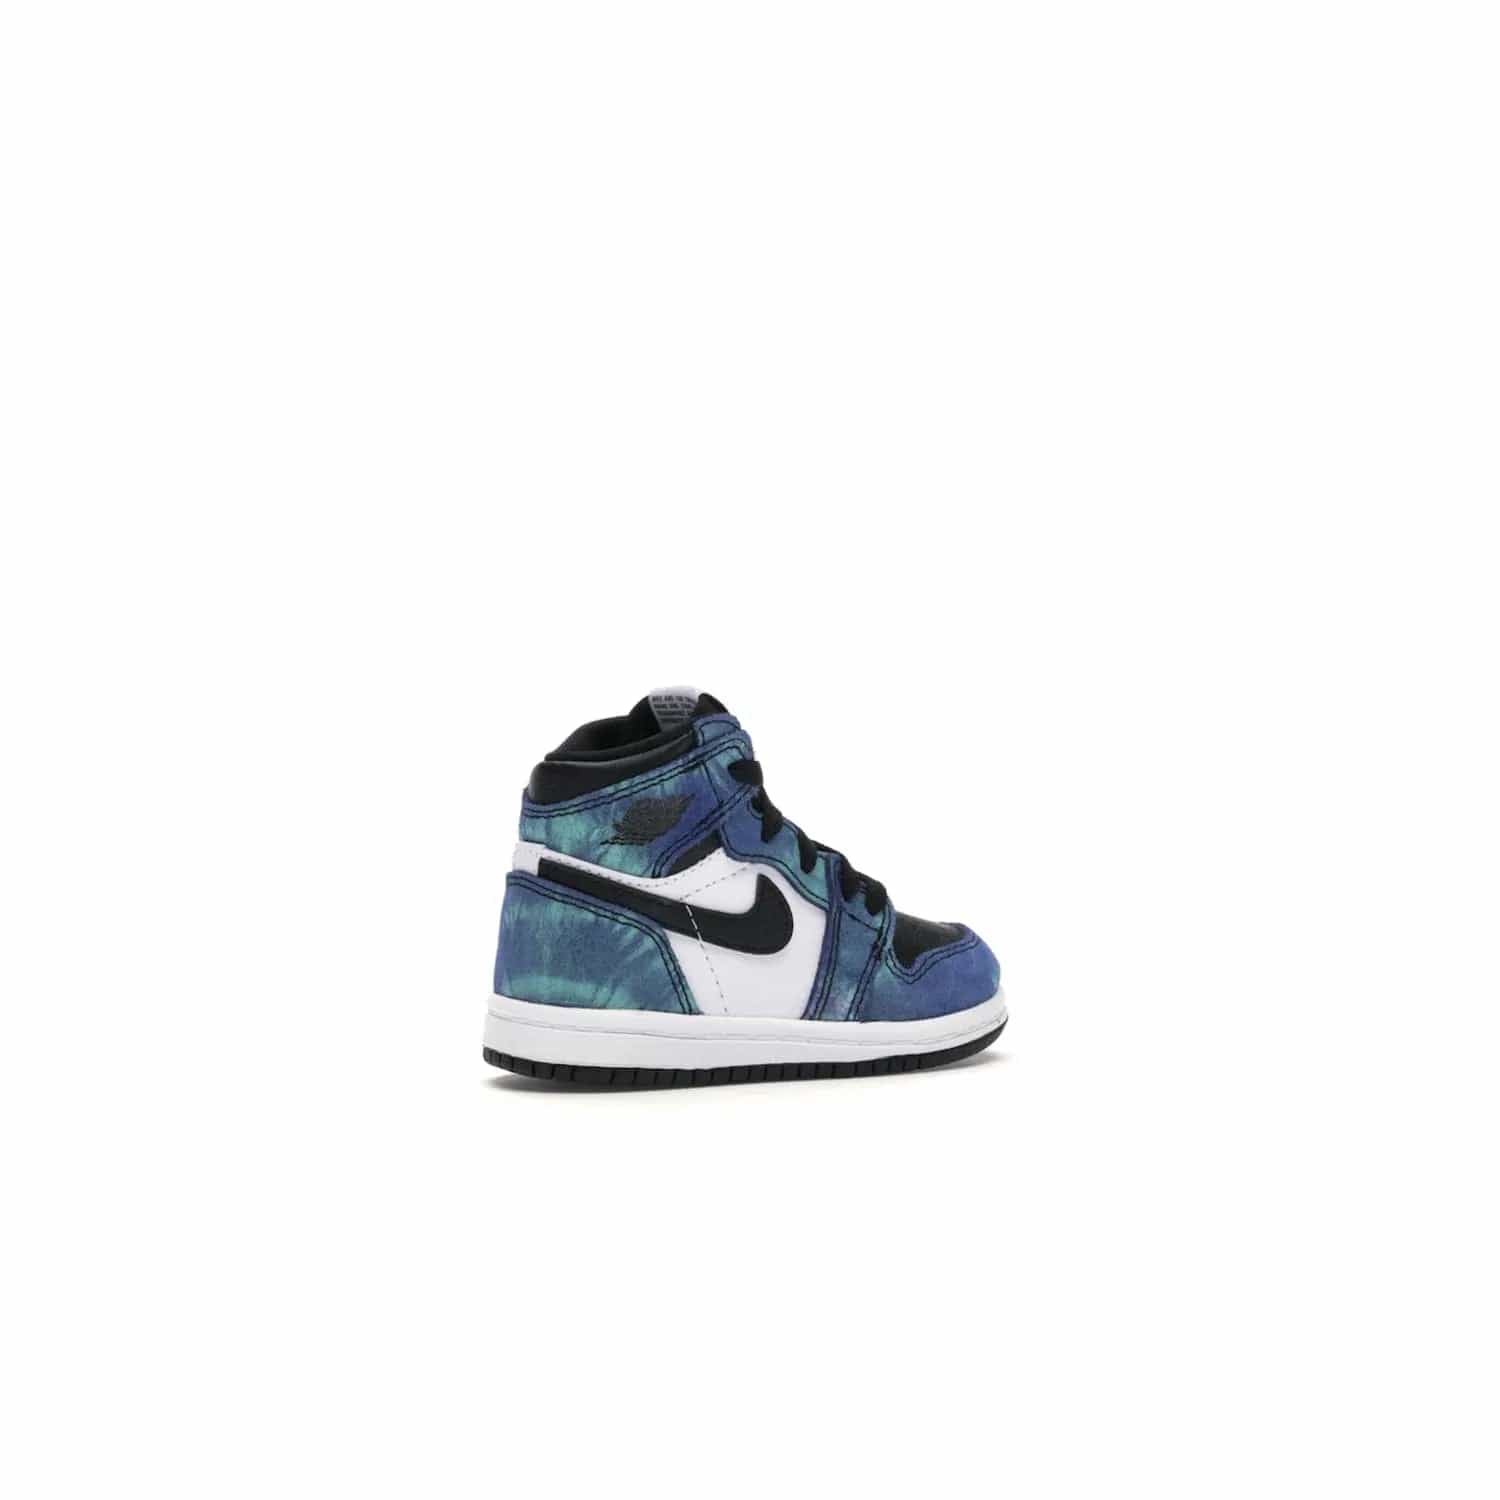 Jordan 1 Retro High Tie Dye (TD) - Image 34 - Only at www.BallersClubKickz.com - Add a unique twist to your sneaker collection with the Jordan 1 Retro High Tie Dye (TD). Classic Air Jordan 1 details like toe box perforations and the signature Swoosh logo on the sidewall are topped with an eye-catching tie dye design that’s perfect for styling all year round.